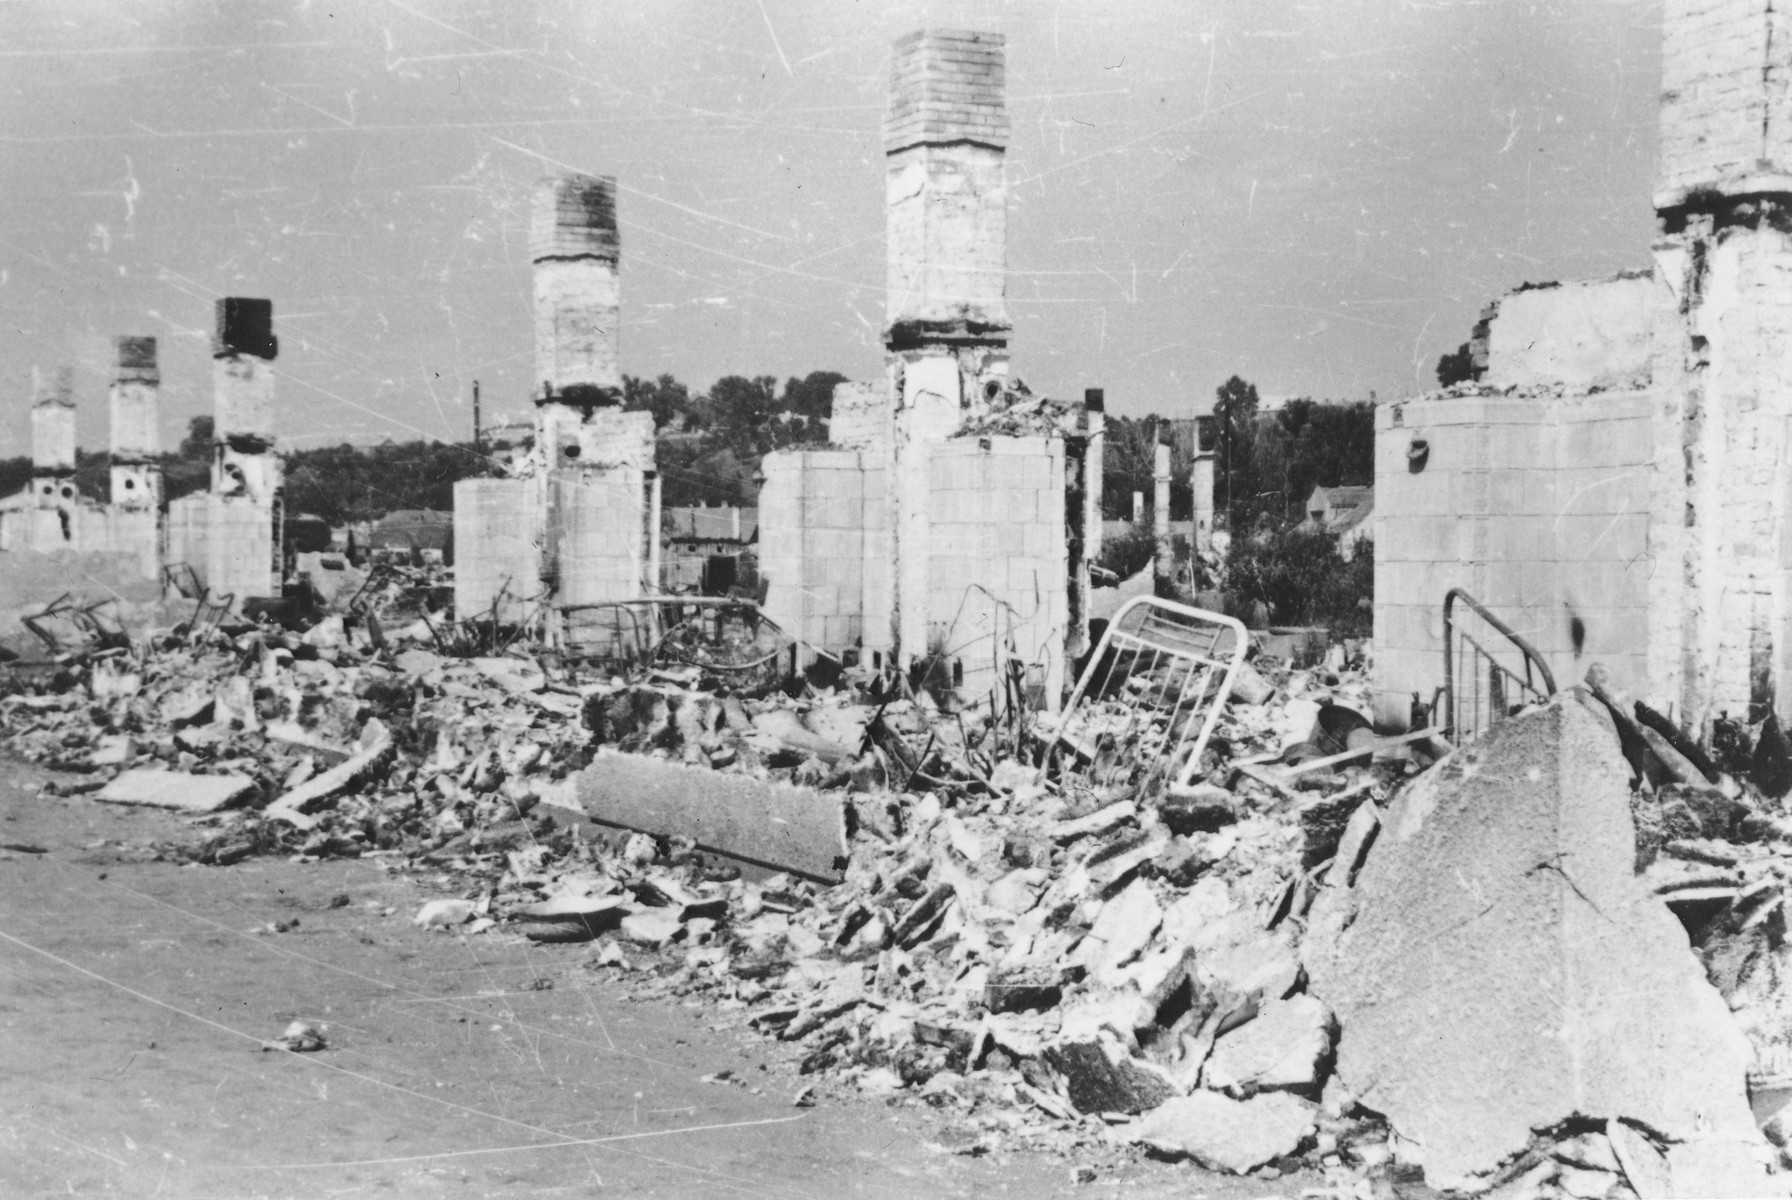 View of the ruins of the Kovno ghetto after its liquidation.

[ALSO HAVE OVERSIZED PRINT.]